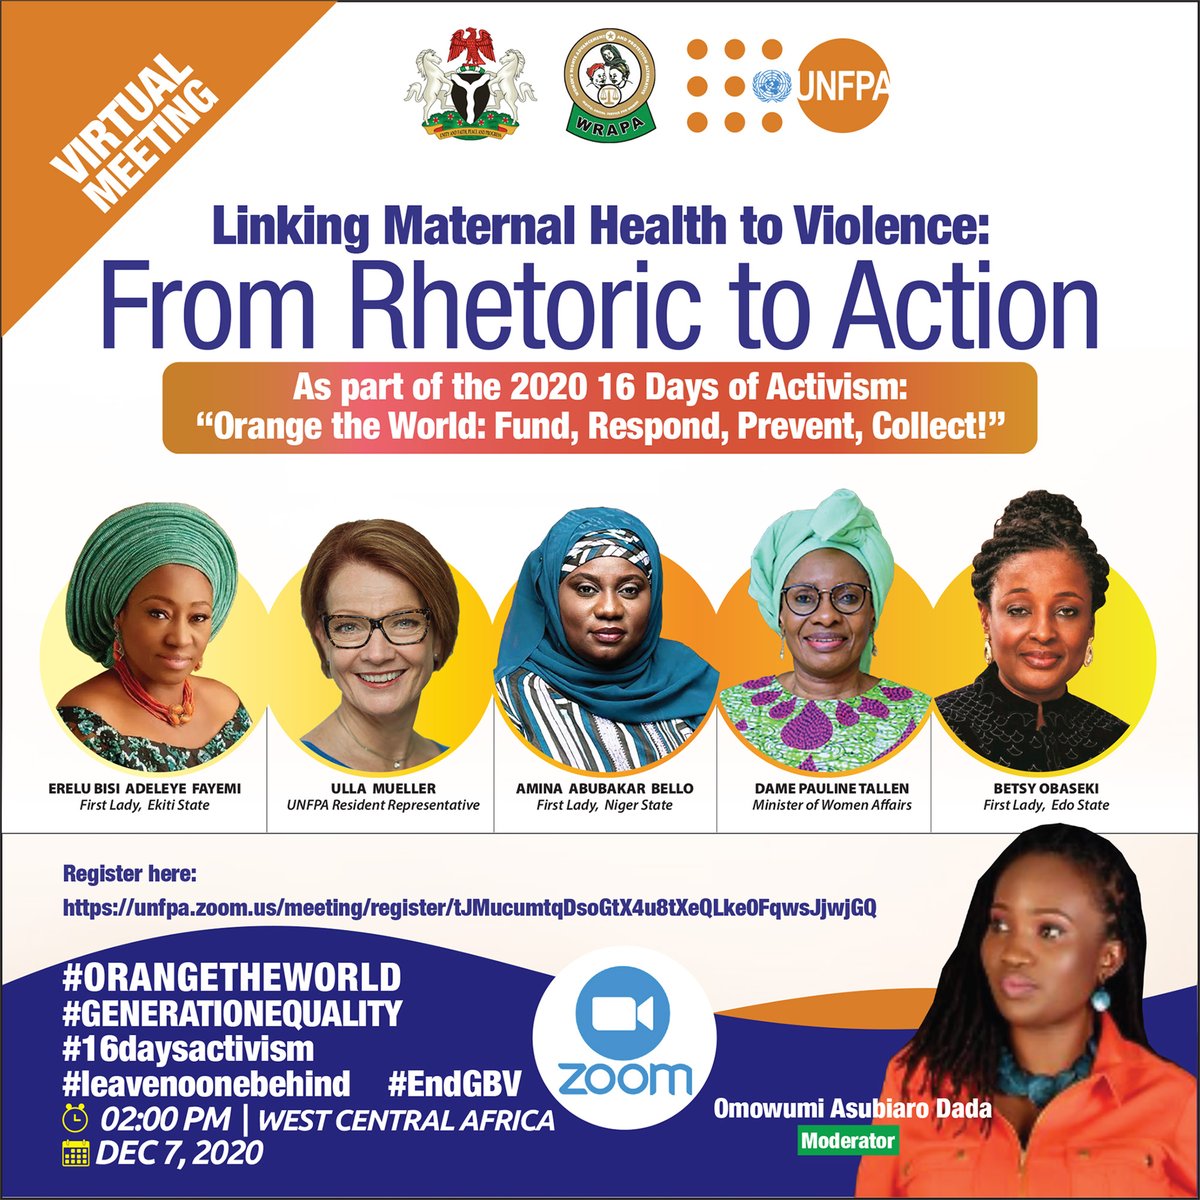 Do join Us! have to a great human to join #16DaysActivism #EndSGBV in our nation @AishaUmmi_Garba @TonyMwebia @stopthecut2020 @UNFPA_WCARO @FriendsofUNFPA @GPtoEndFGM @GPChildMarriage @youthhubafrica @AfriyanNigeria @moyoTVC @NTANewsNow @C4MNH @Channel4News @GuardianEndFGM do RT